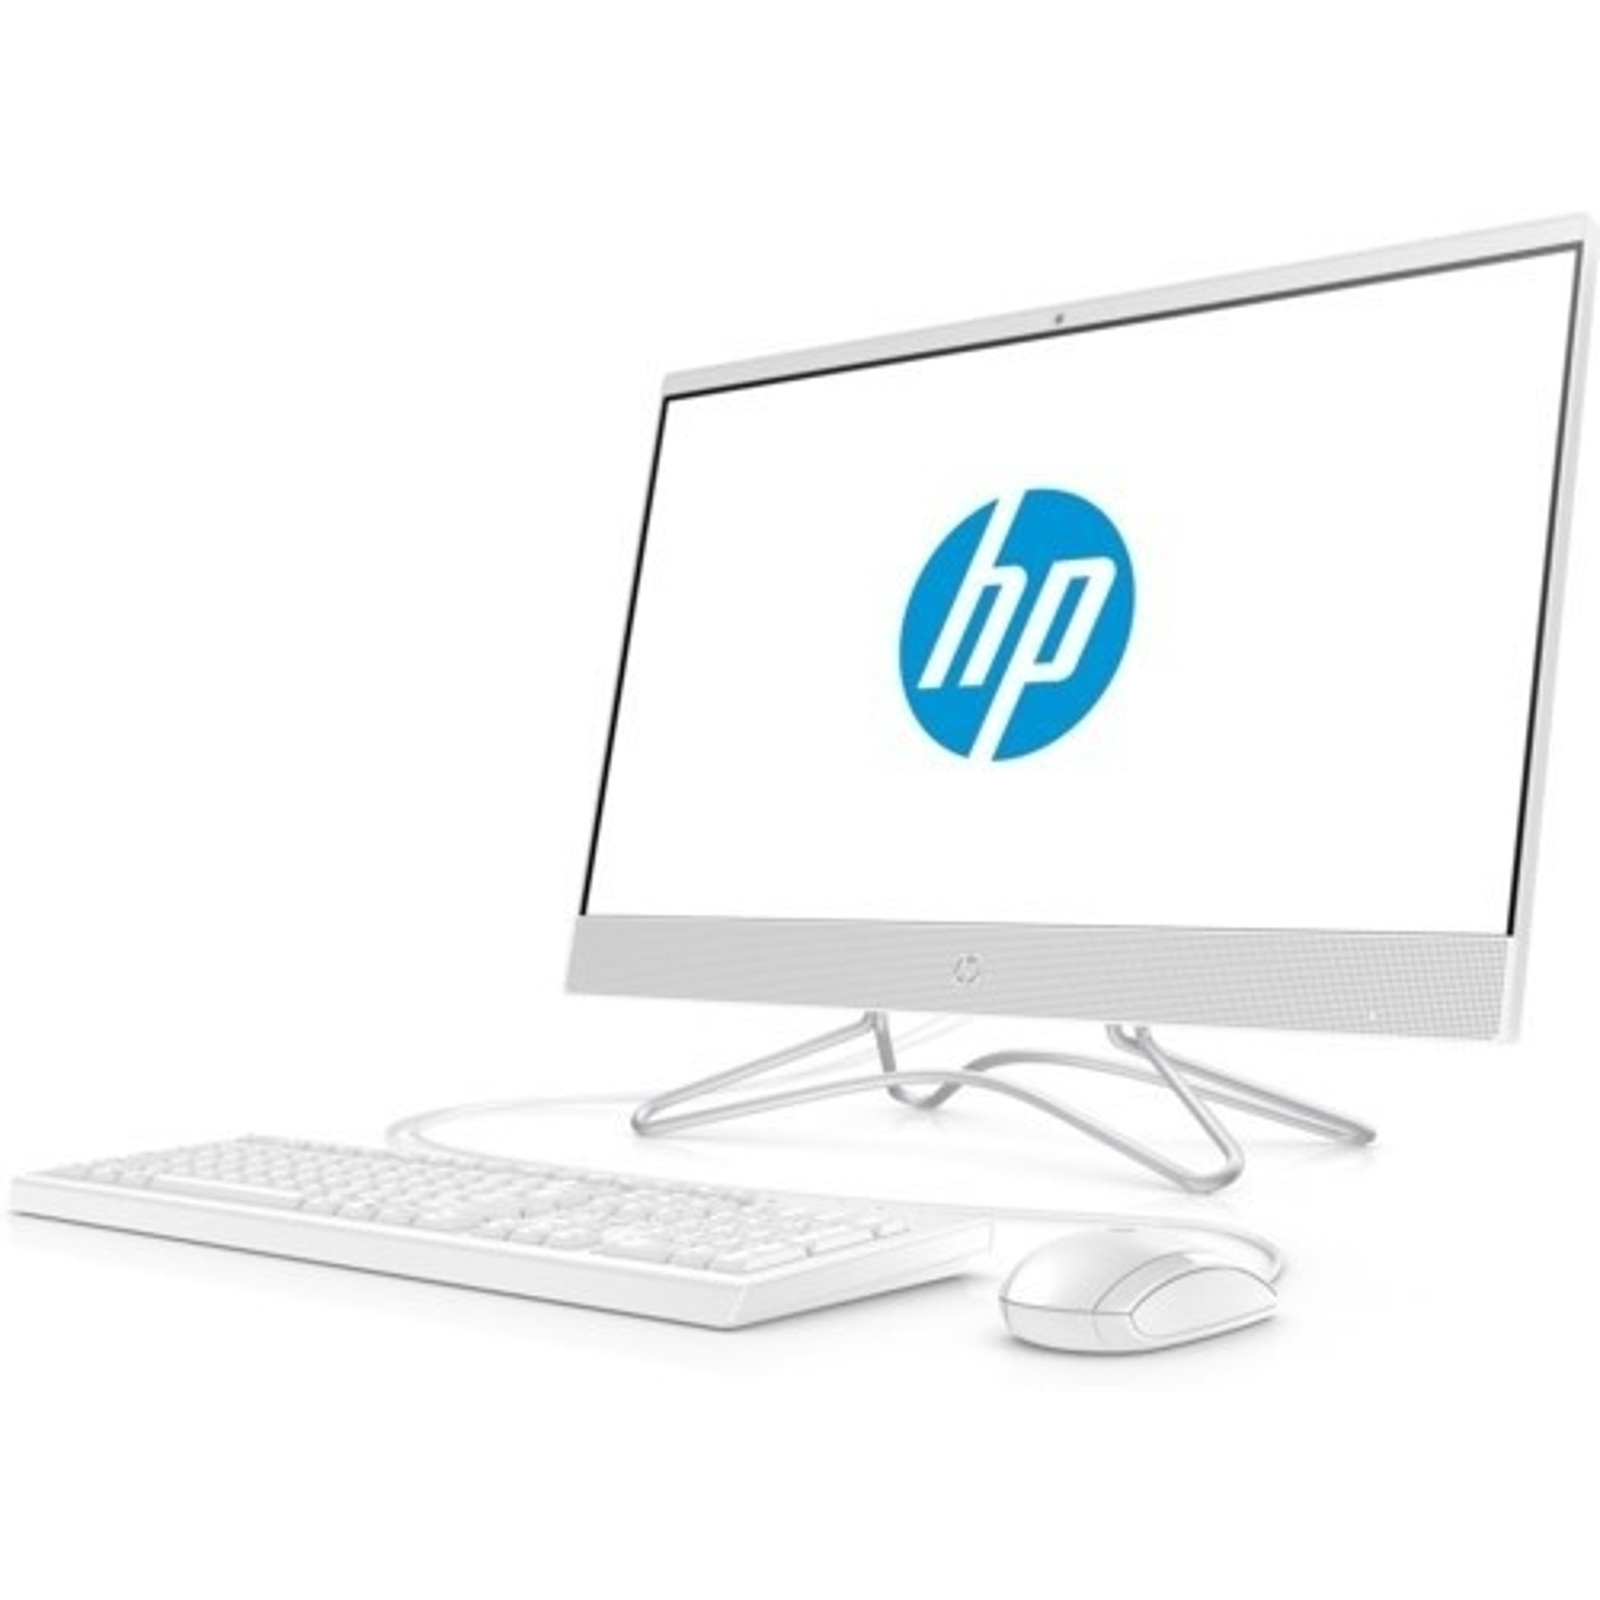 HP 24-F0007NT 4GS69EA i7-8700T 8GB 256SSD 2GB MX110 23.8" FHD IPS NONTOUCH FREDOOS ALL IN ONE PC